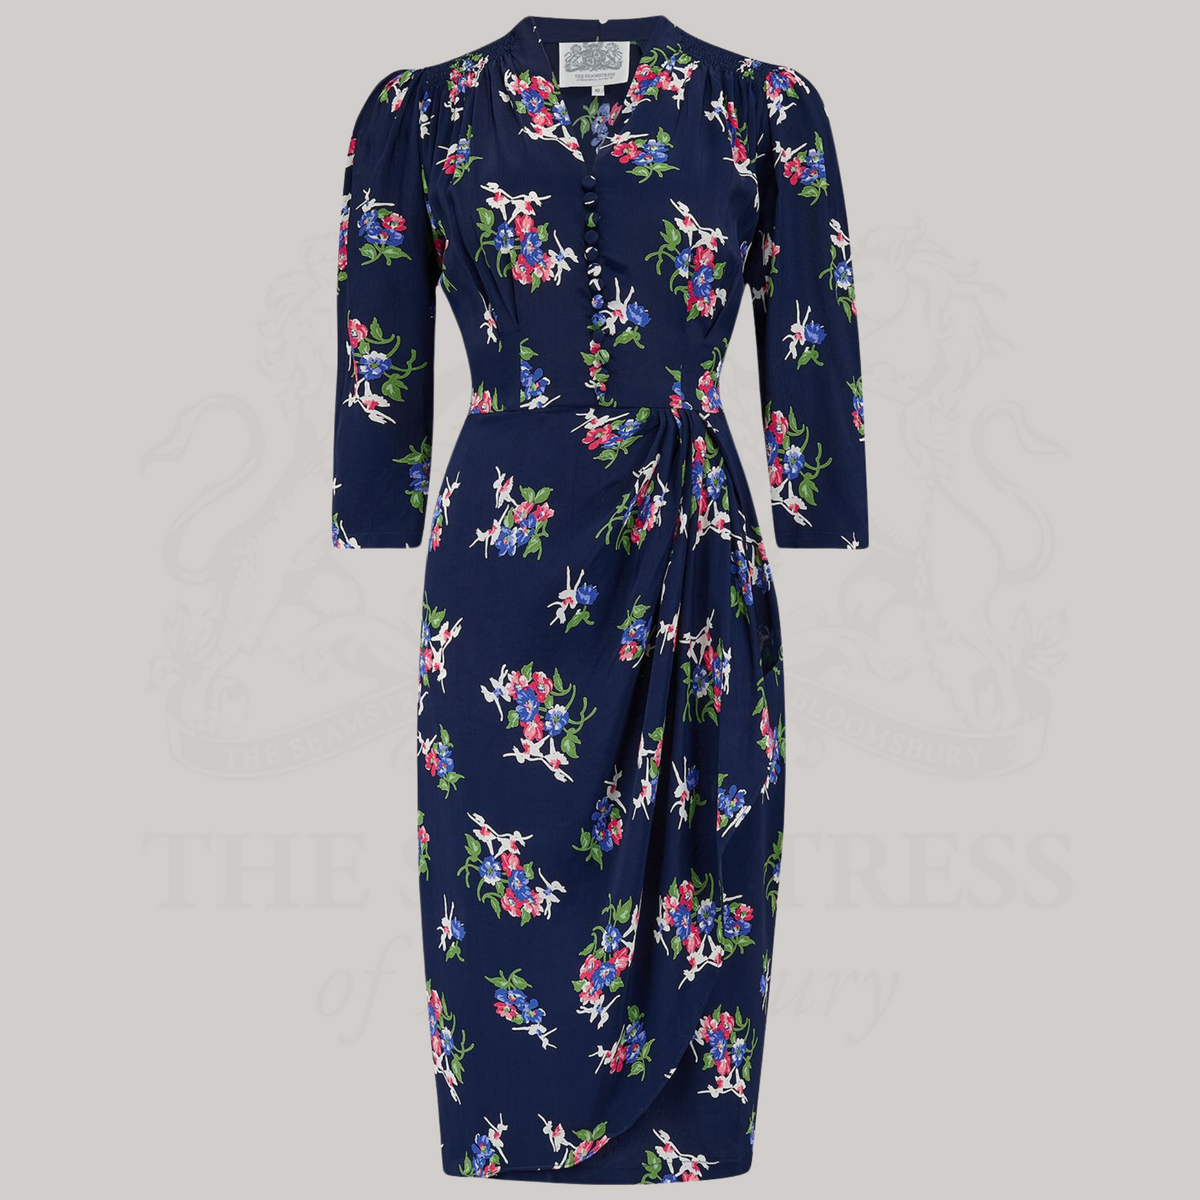 Mabel 3/4 Waterfall Dress in Navy Floral Dancer